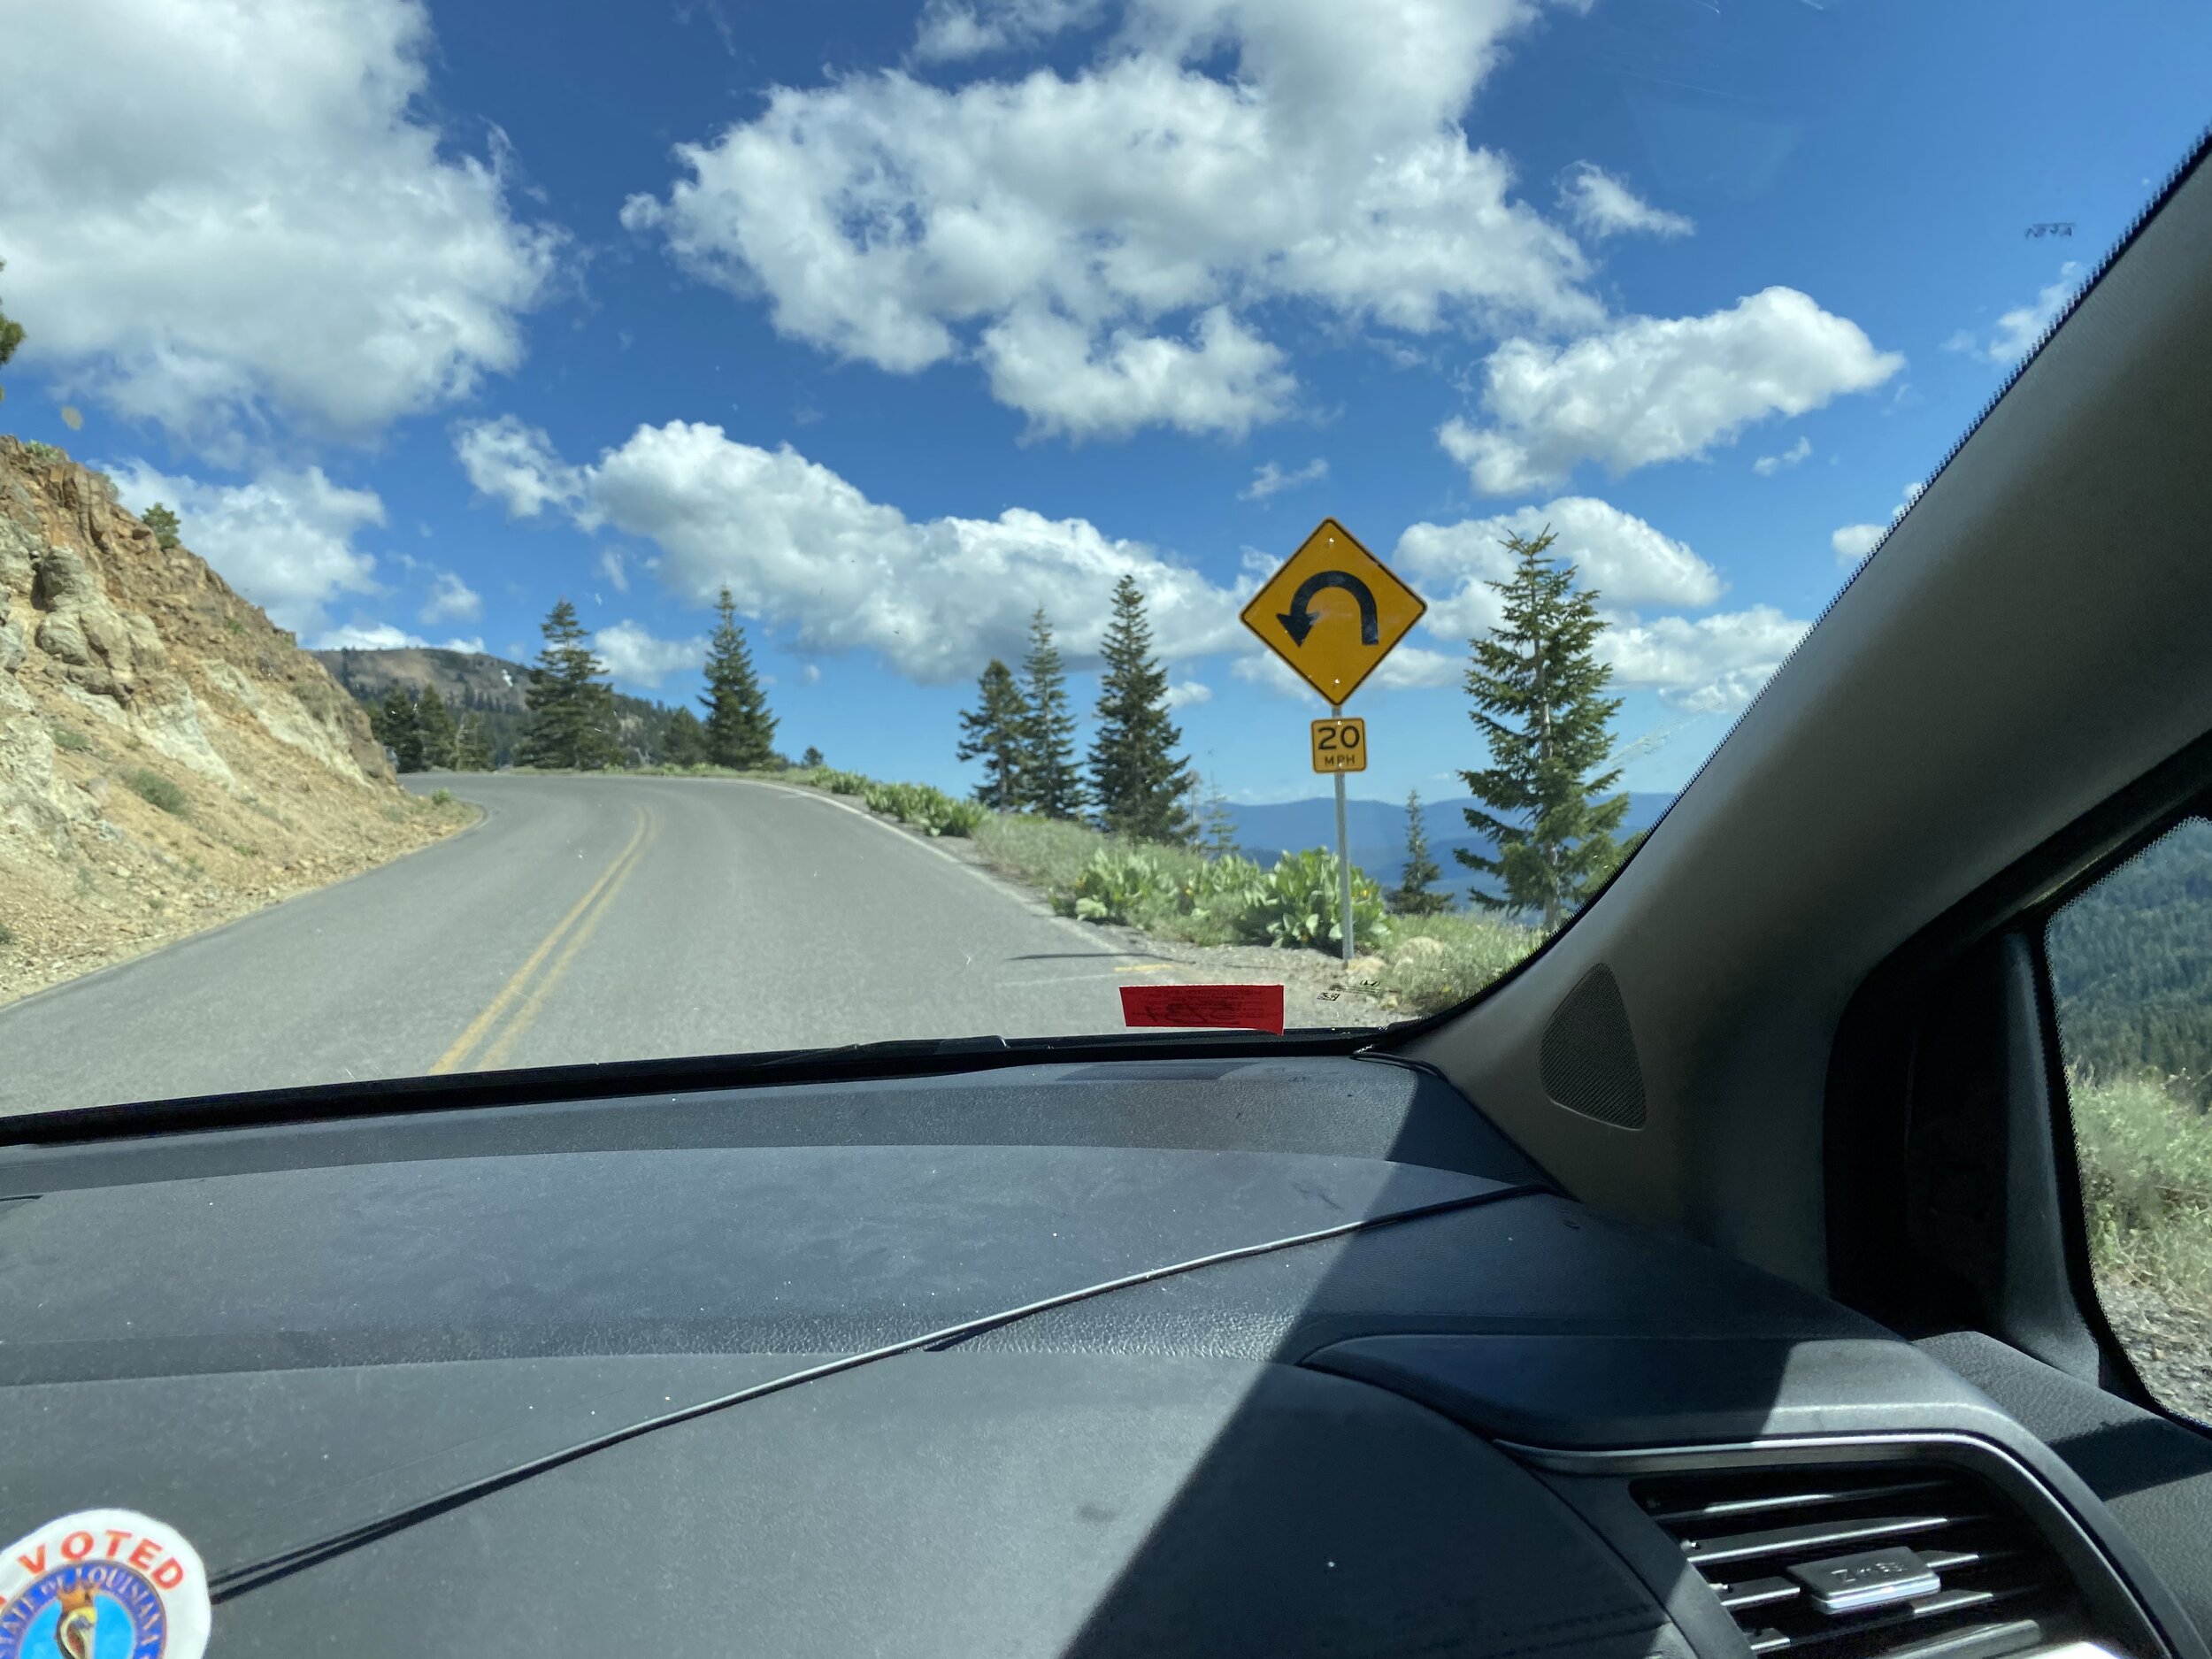 A few steep cliff edges and sharp curves around the park keep you paying attention to the road!  Photo by Karen Boudreaux, June 8, 2021